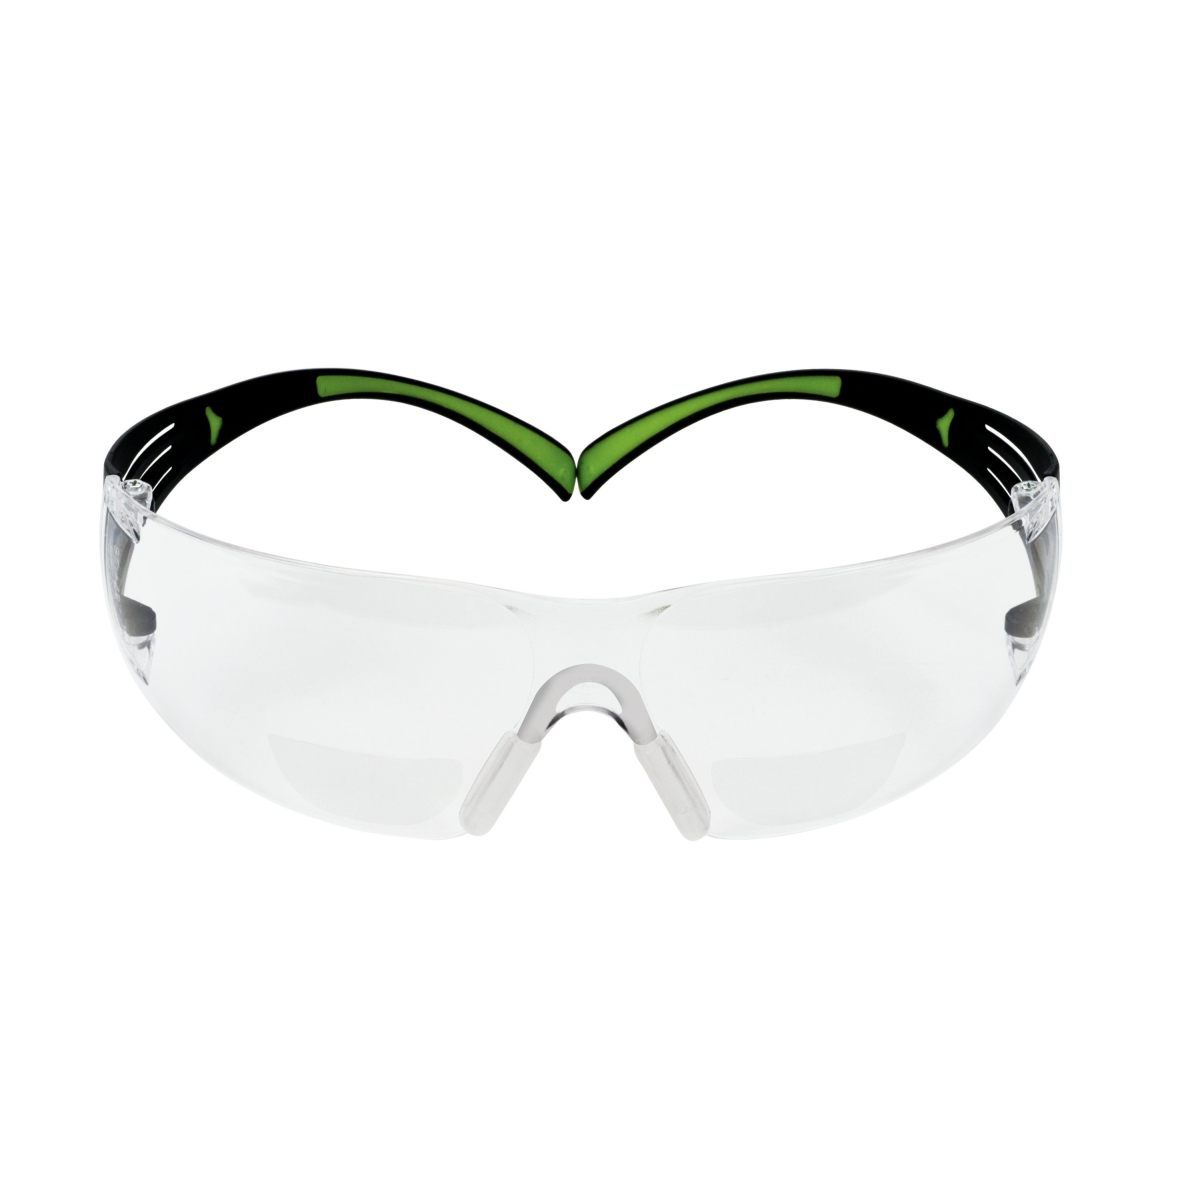 3M™ SecureFit™ Protective Eyewear SF420AF, Clear Lens, +2.0 Diopter (Availability restrictions apply.)